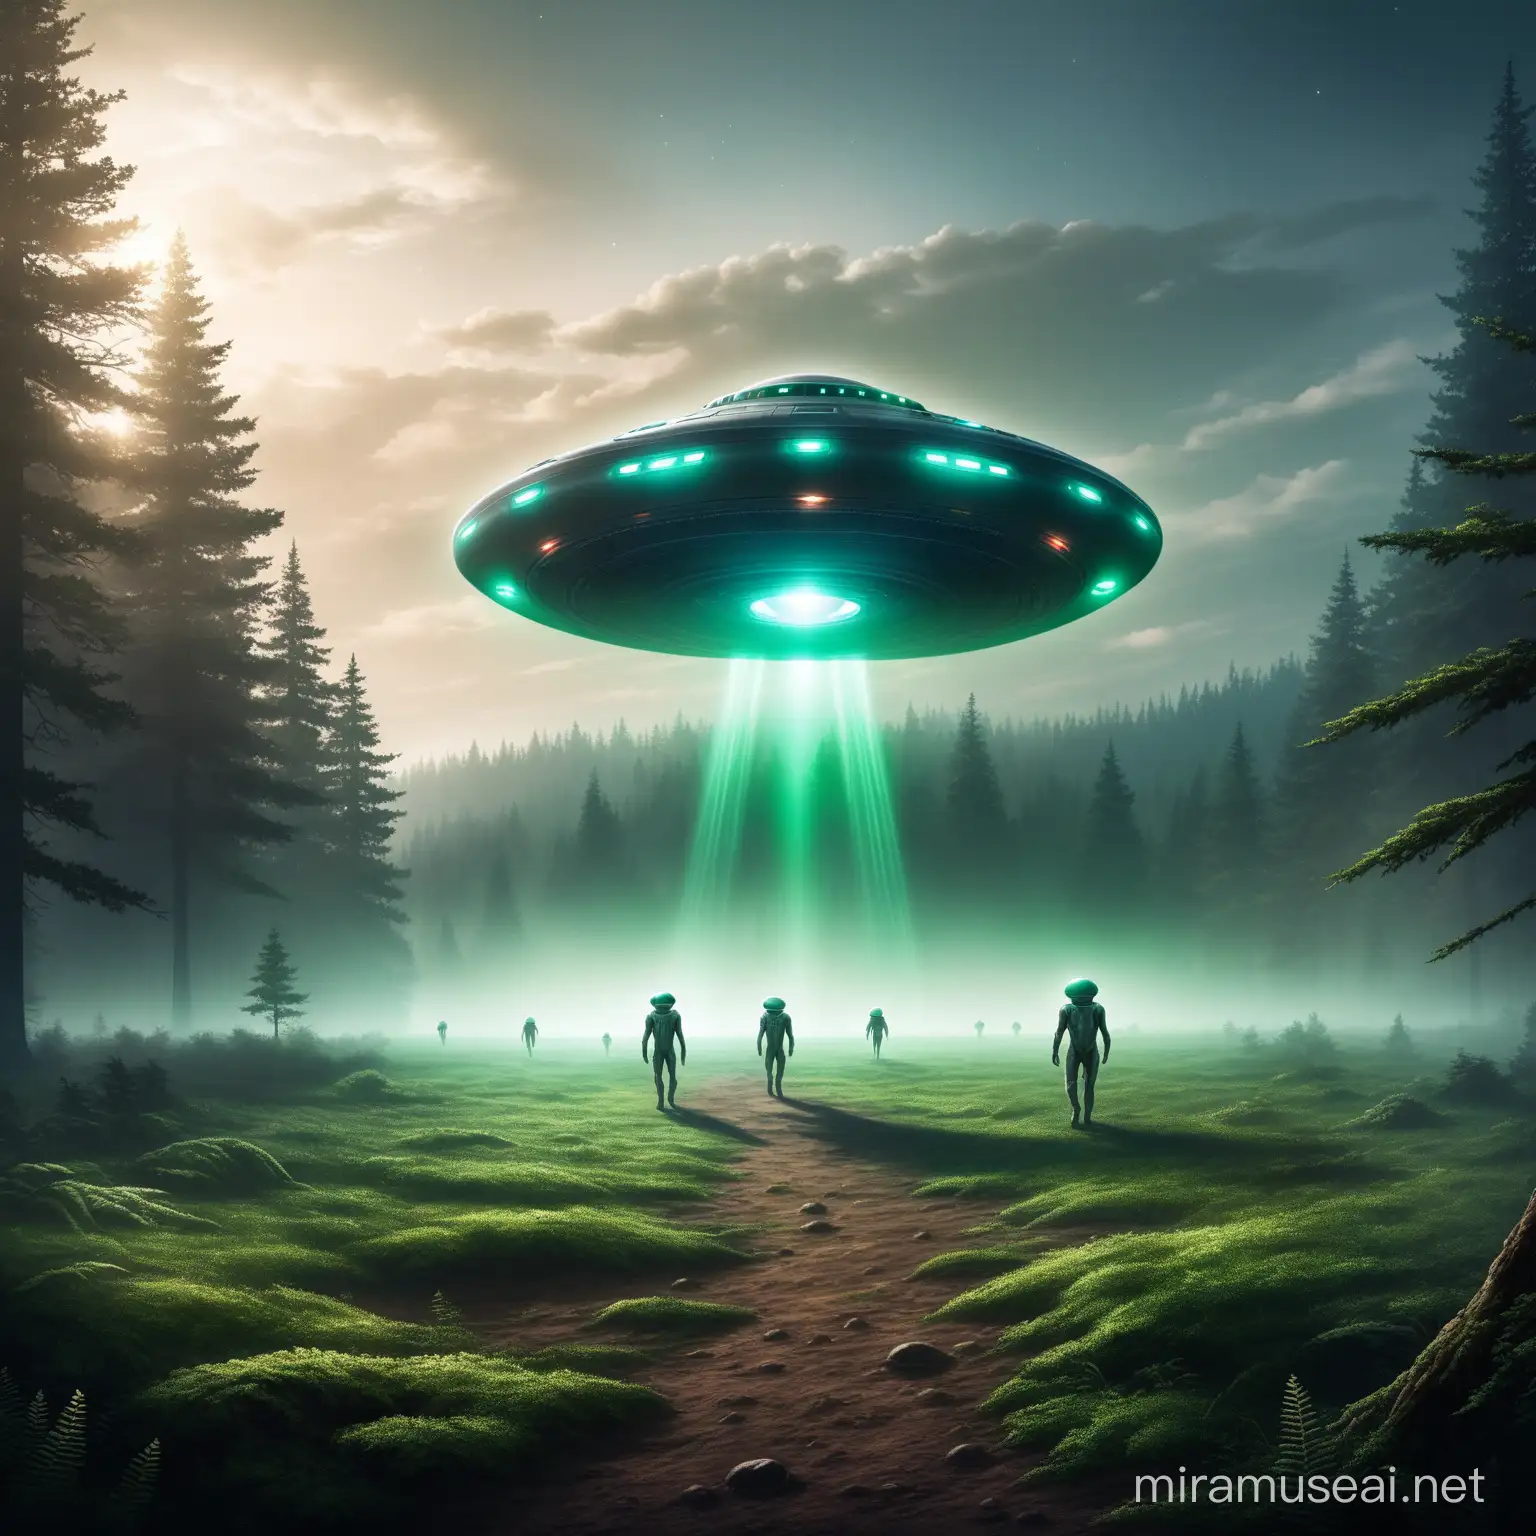 a ufo that has landed in a clearing. aliens walk around on the ground